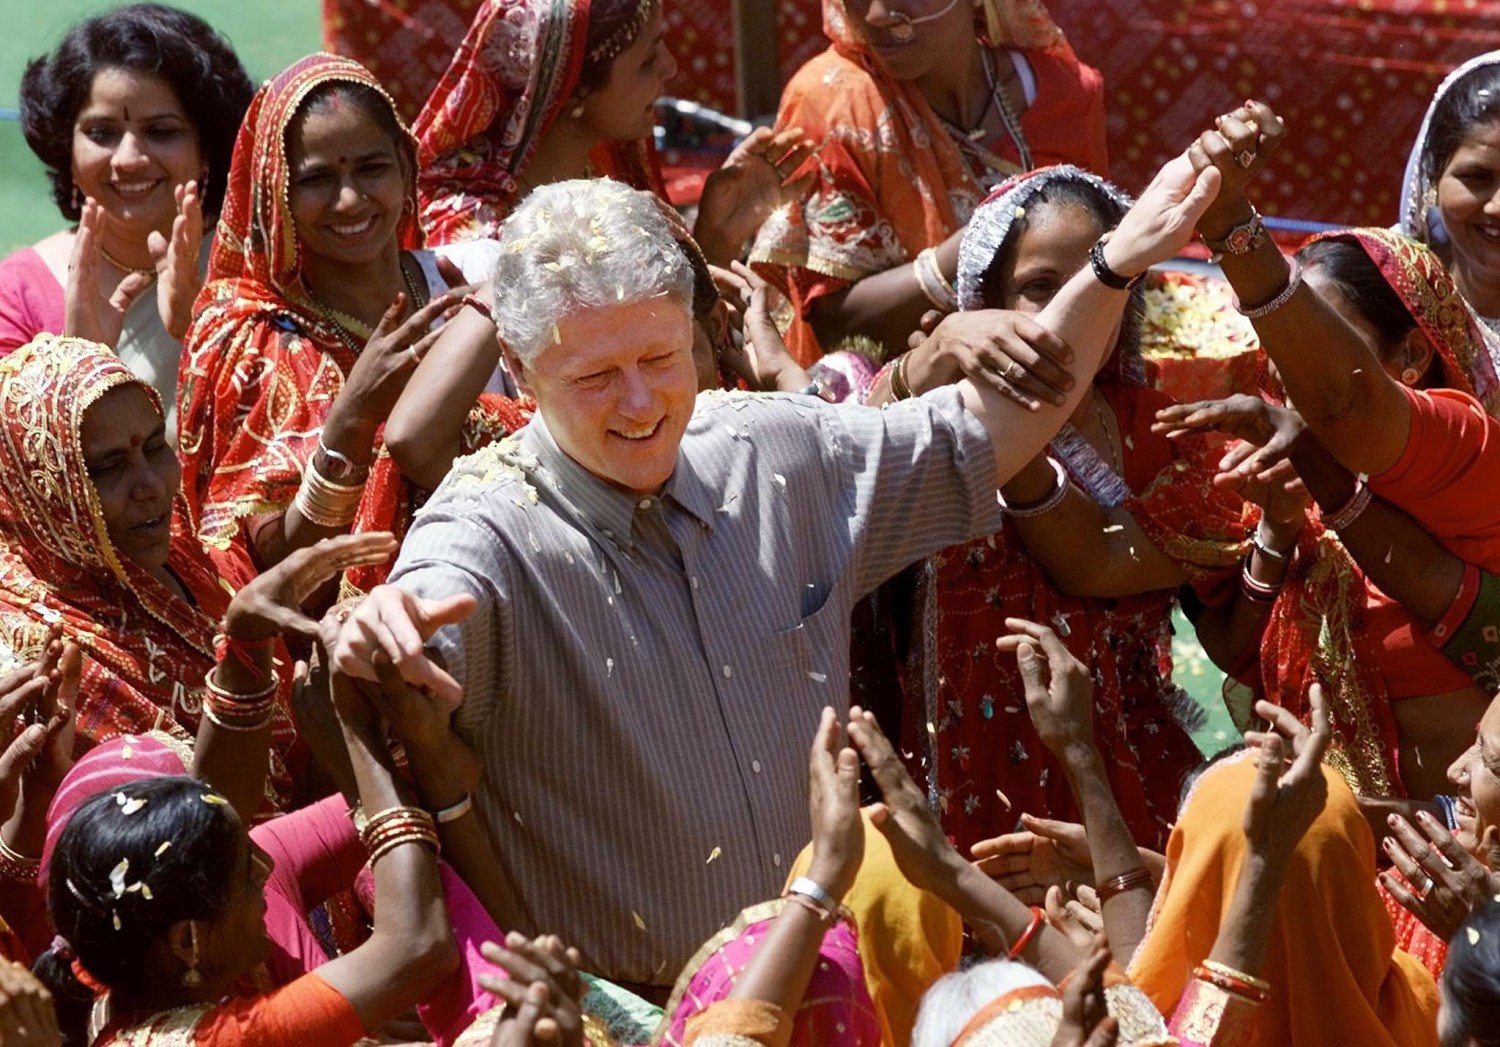 U.S. President Bill Clinton is surrounded by local village women while visiting with members of the governing council of Naila Village in Rajasthan, March 23. [The President is scheduled to finish his visit to India on Saturday when he flies on to Islamabad for a one-day visit. ]